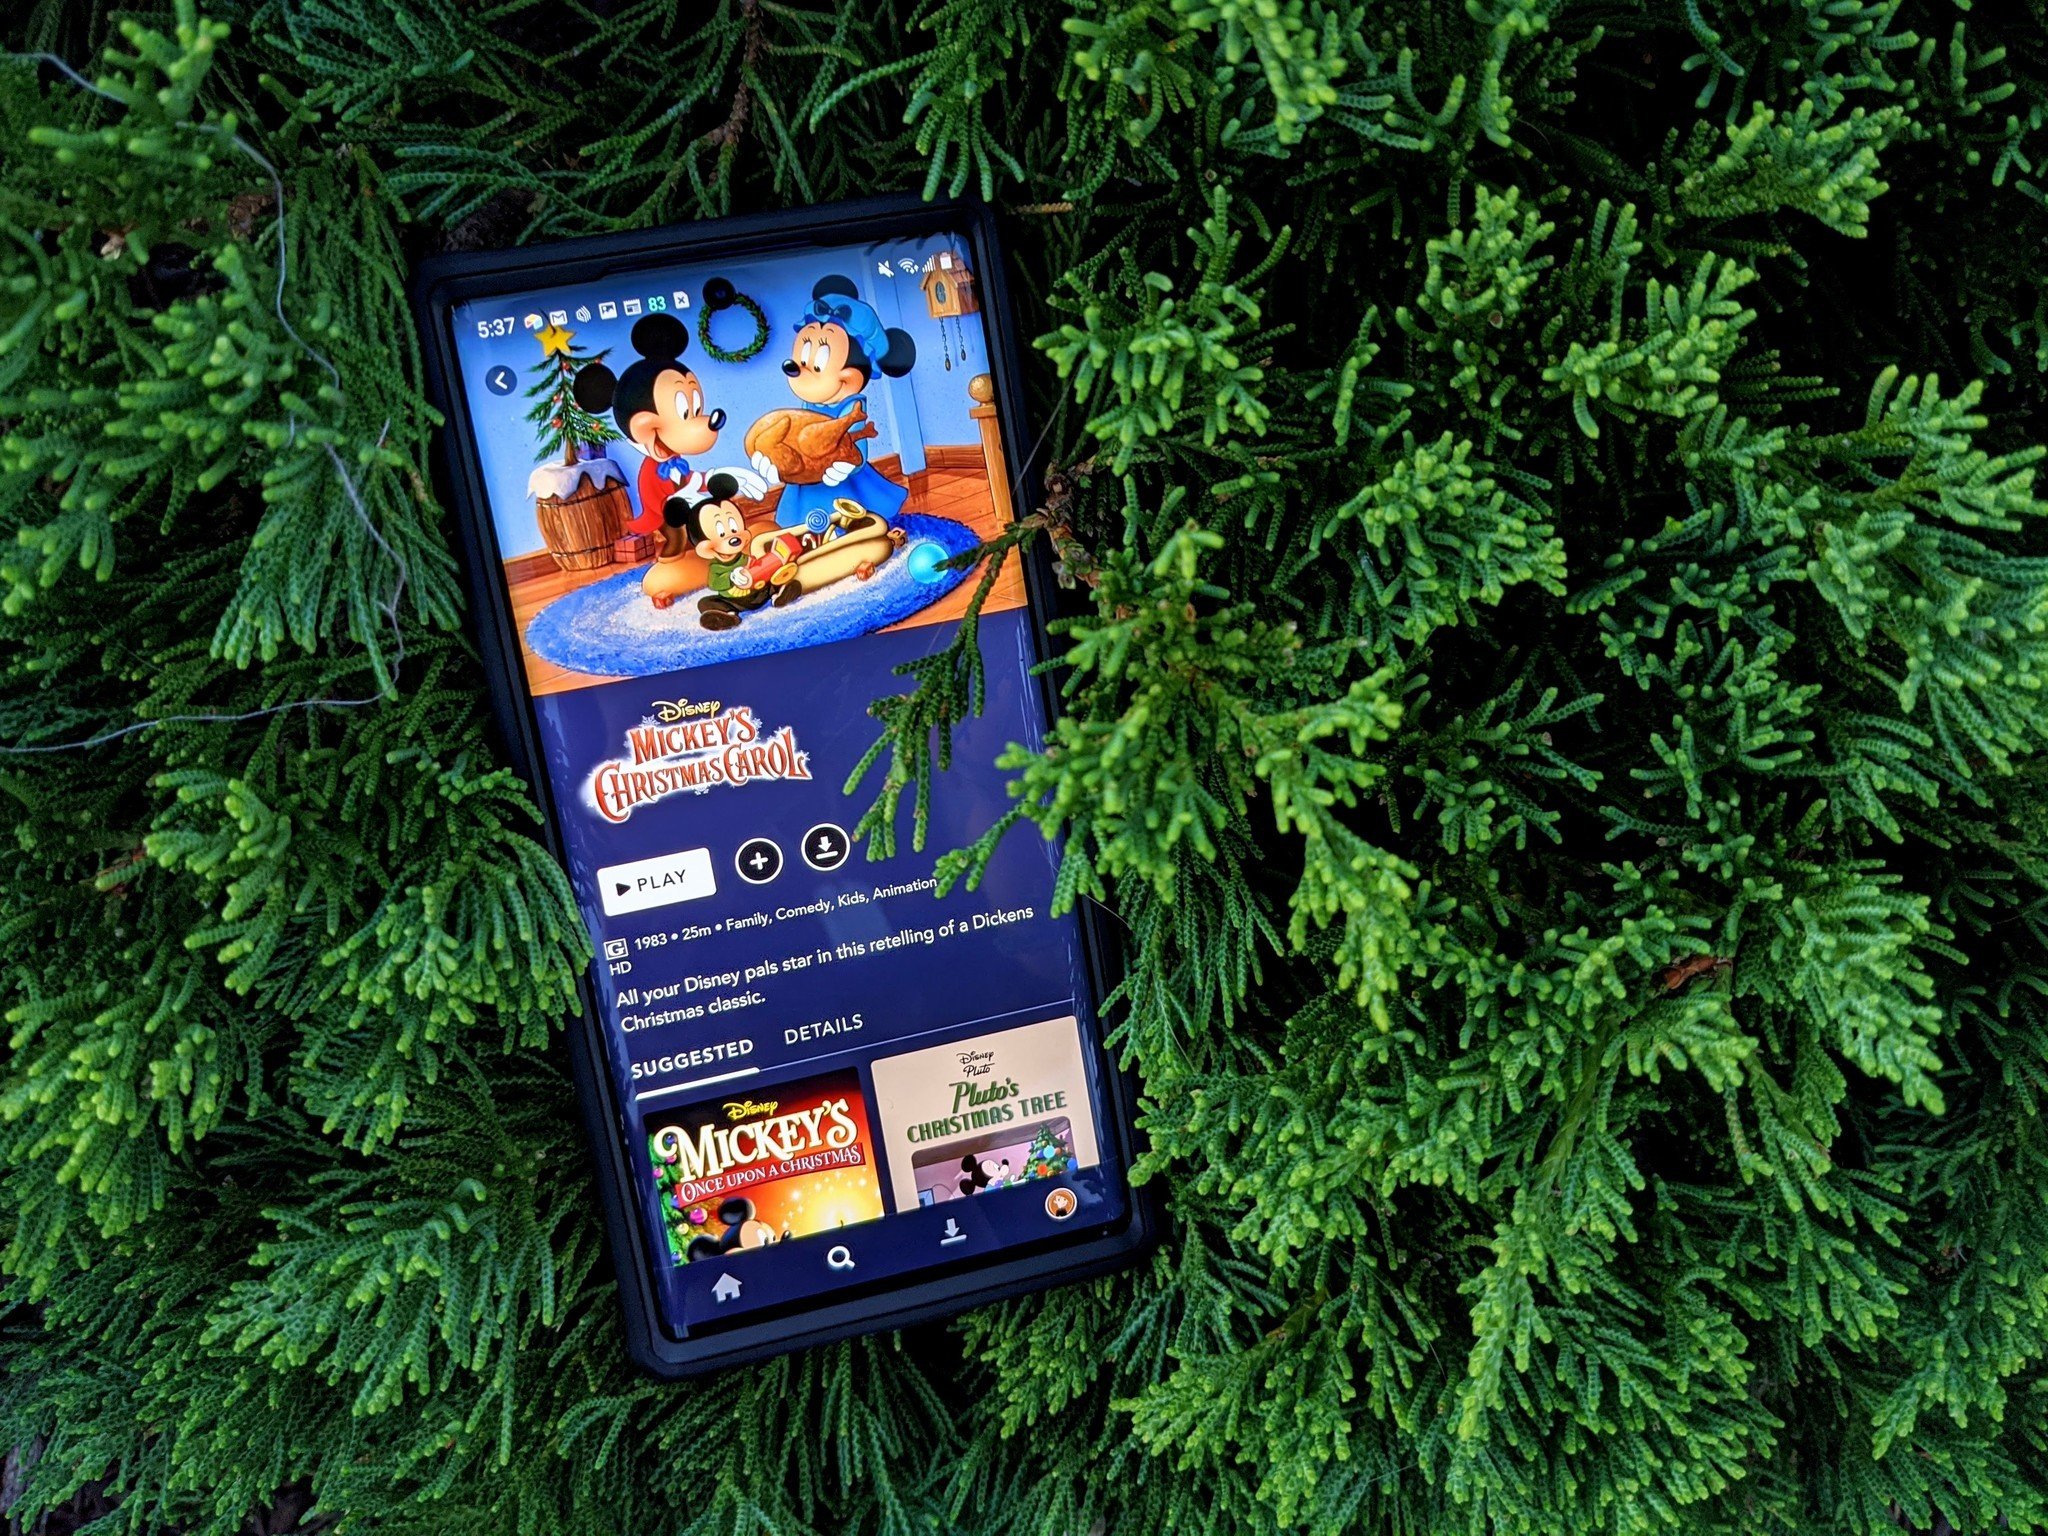 You Can Now Give The Gift Of Disney Plus Without Having To Go To